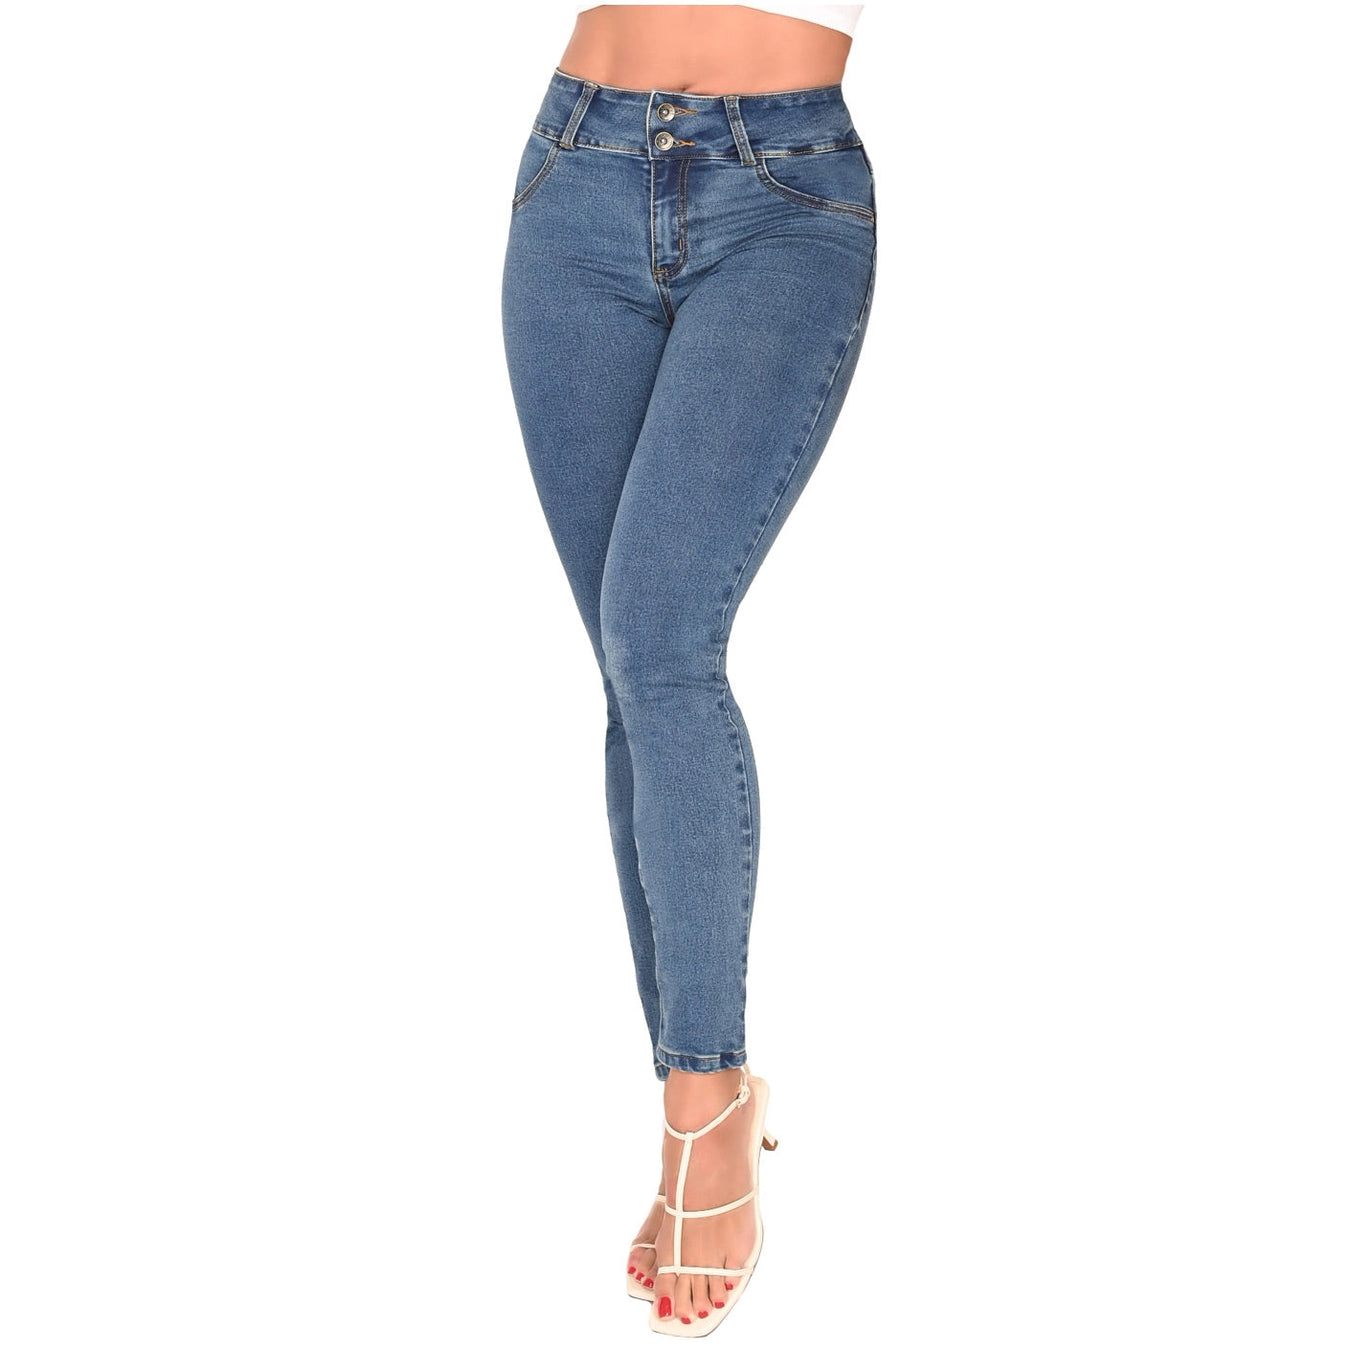 Colombian Jeans Wholesale and Denim Fashion